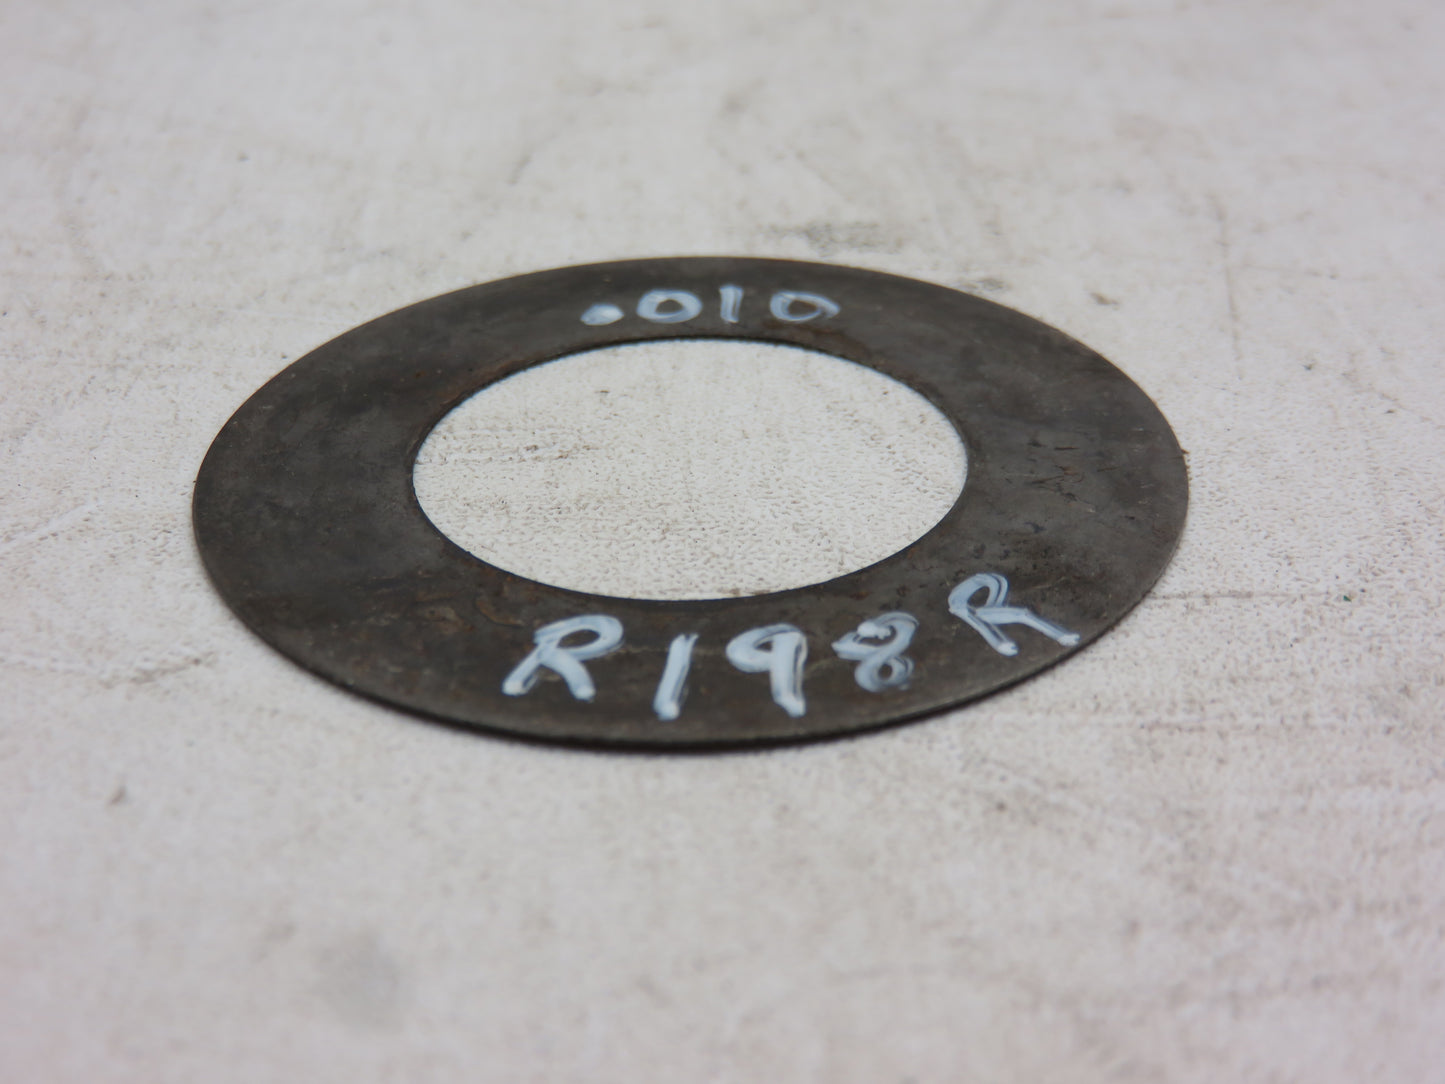 R200R John Deere Fan And Engine Oil Pump Drive Shim Washer For R, 70, 80, 720, 820, 730, 830